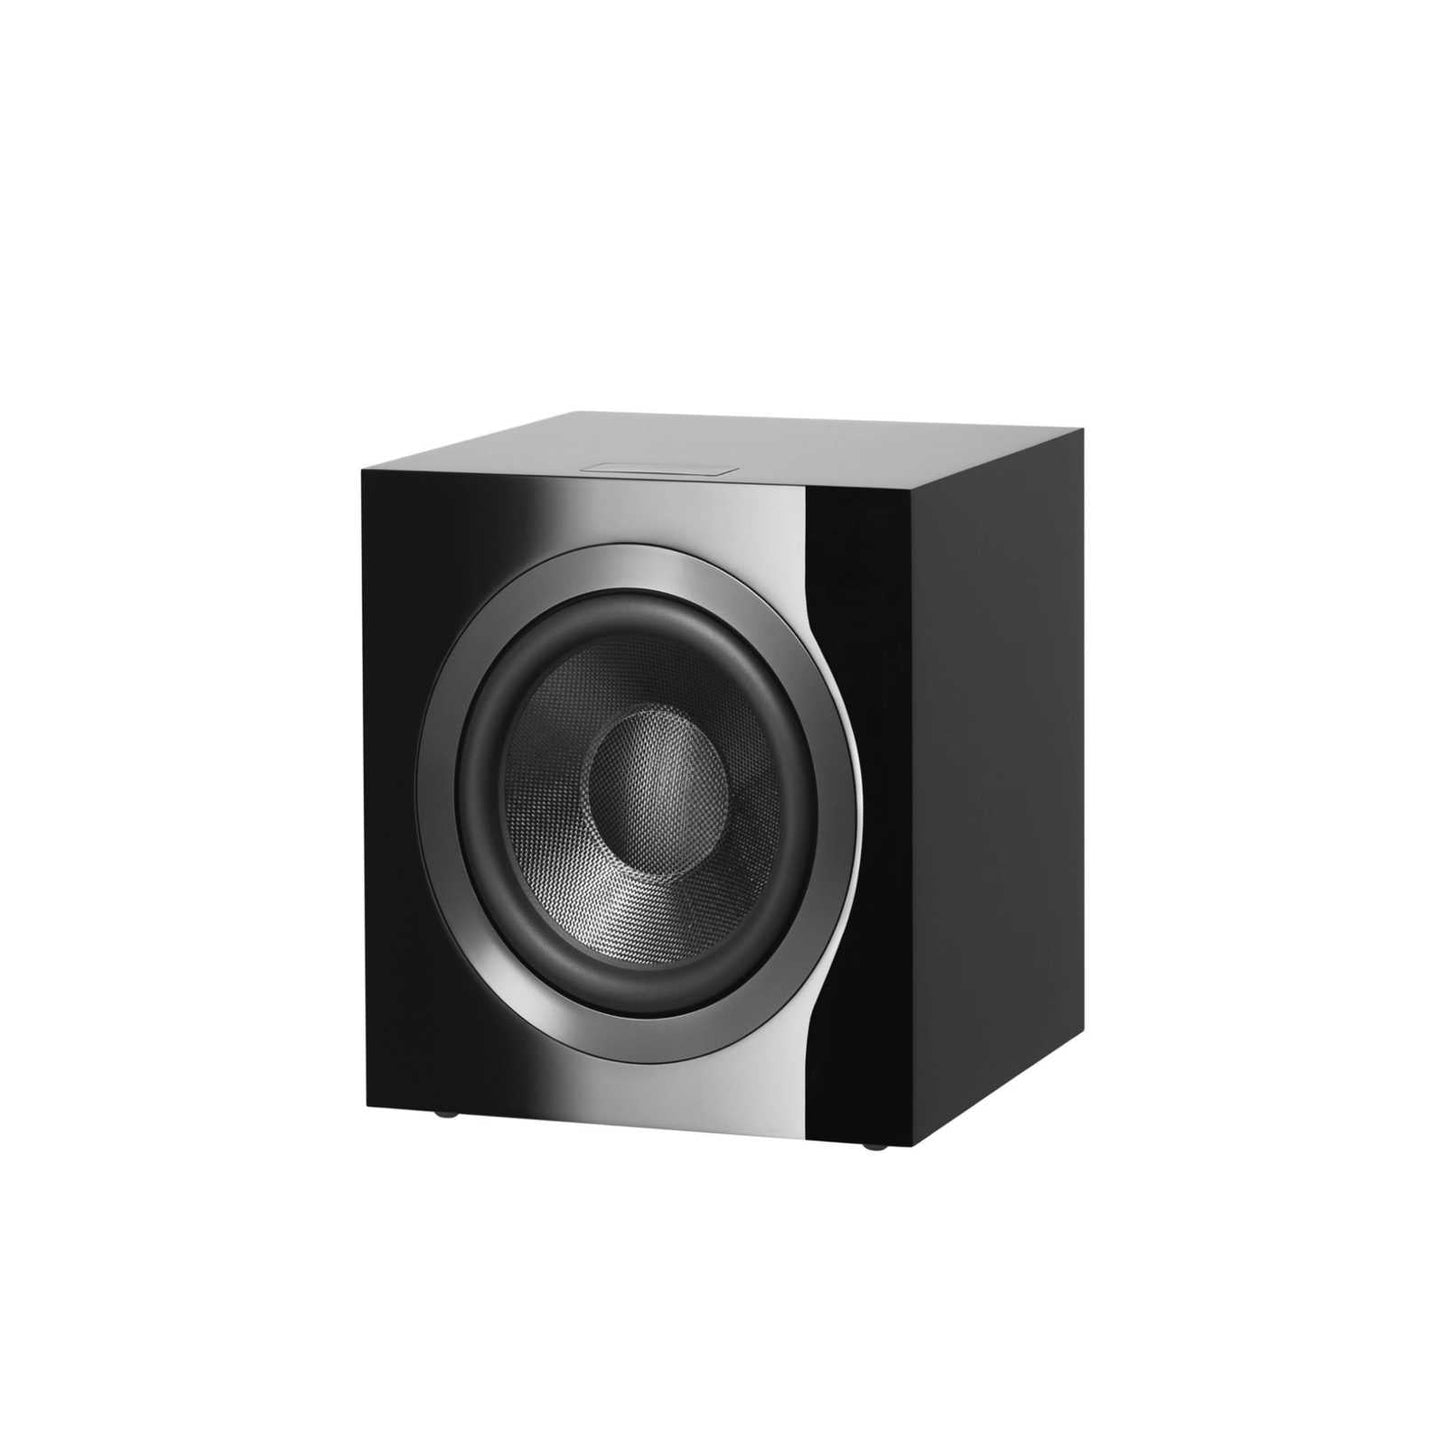 Bowers & Wilkins (B&W) DB 4S Powered Subwoofer